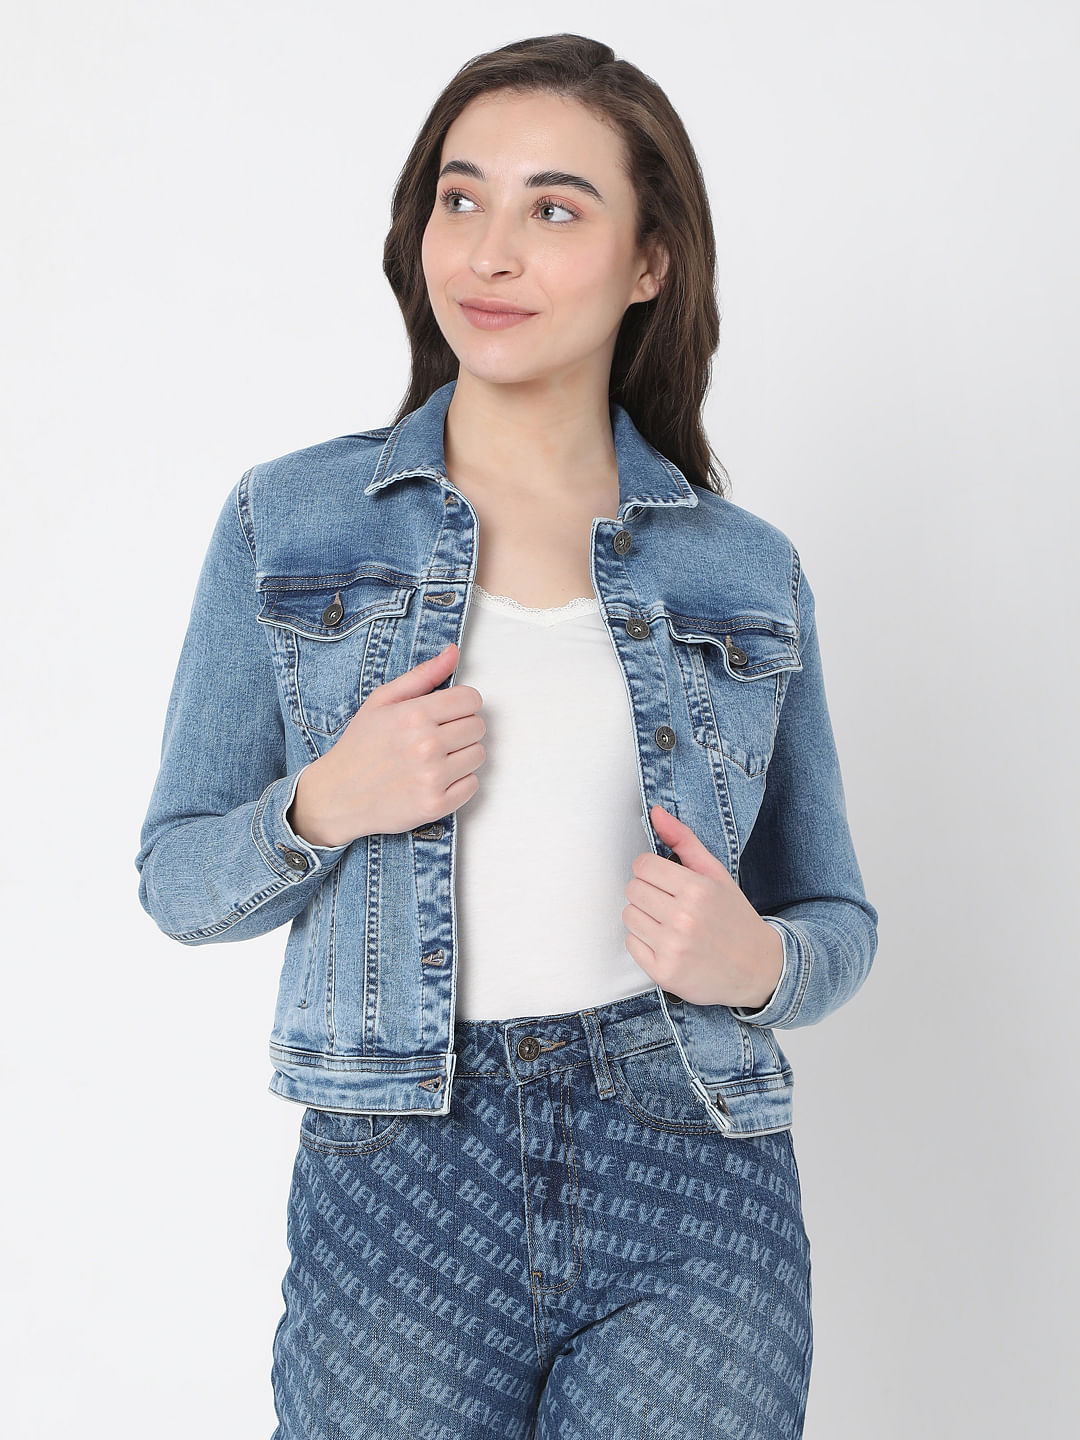 Buy Online Shopping Mall Blue & Light Blue Denim Jackets for Women and  Girls|(Pack of 2)|Size- Small at Amazon.in